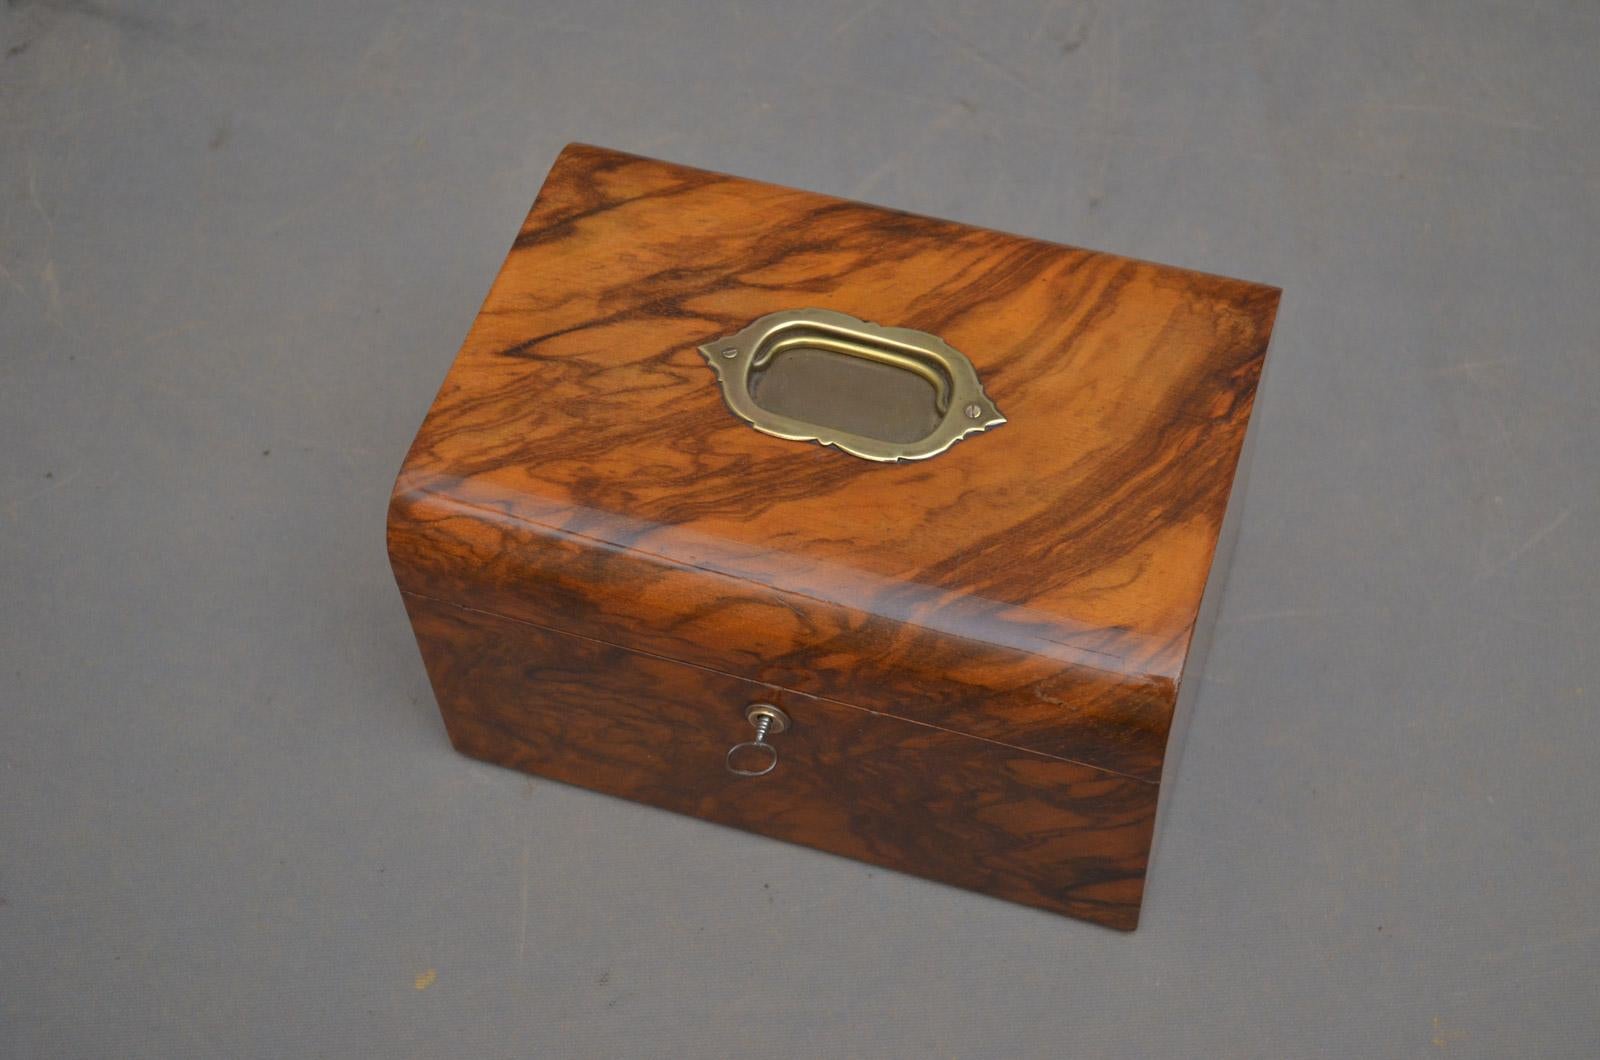 Sn4433 fine Victorian figured walnut jewellery or sewing box with brass carrying handle, original working lock and a key and green interior, all in home ready condition, circa 1880.
Measures: H 6